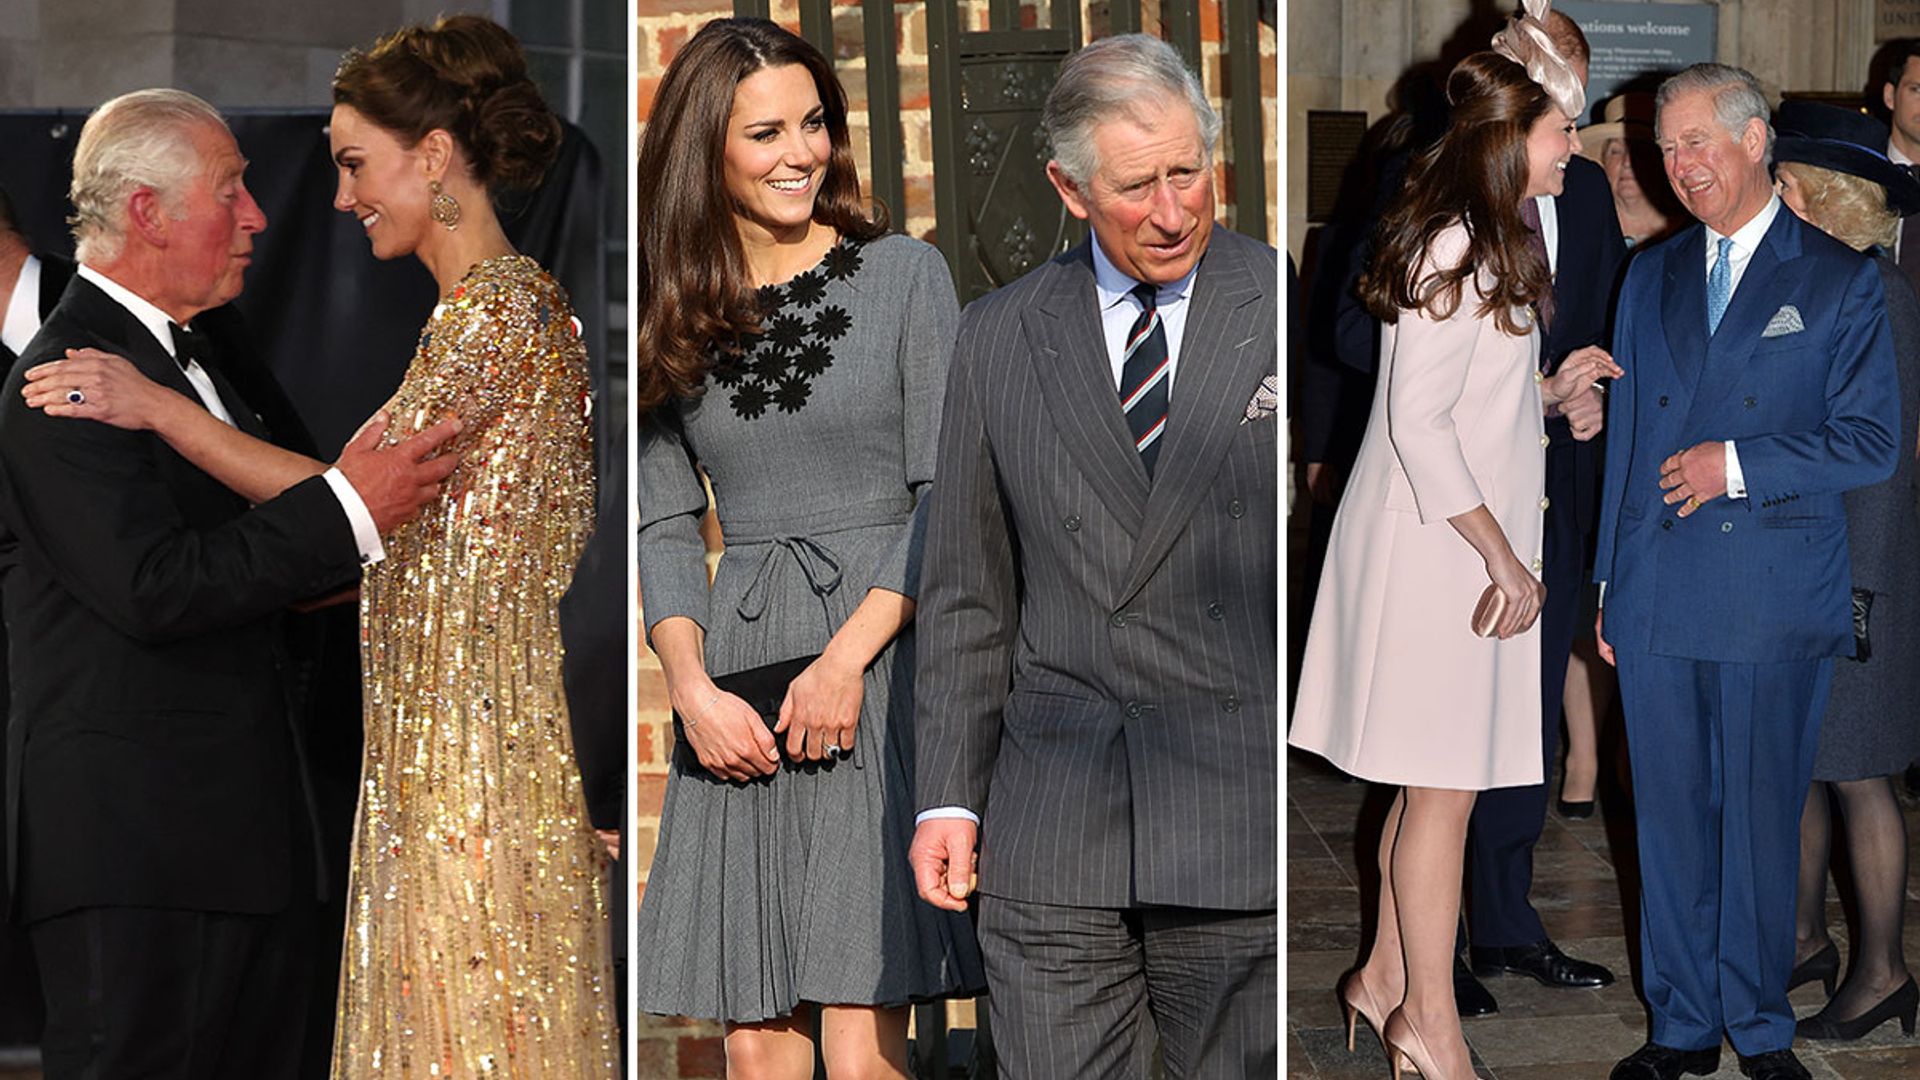 Kate Middleton's close bond with Prince Charles in 10 sweet photos | HELLO!